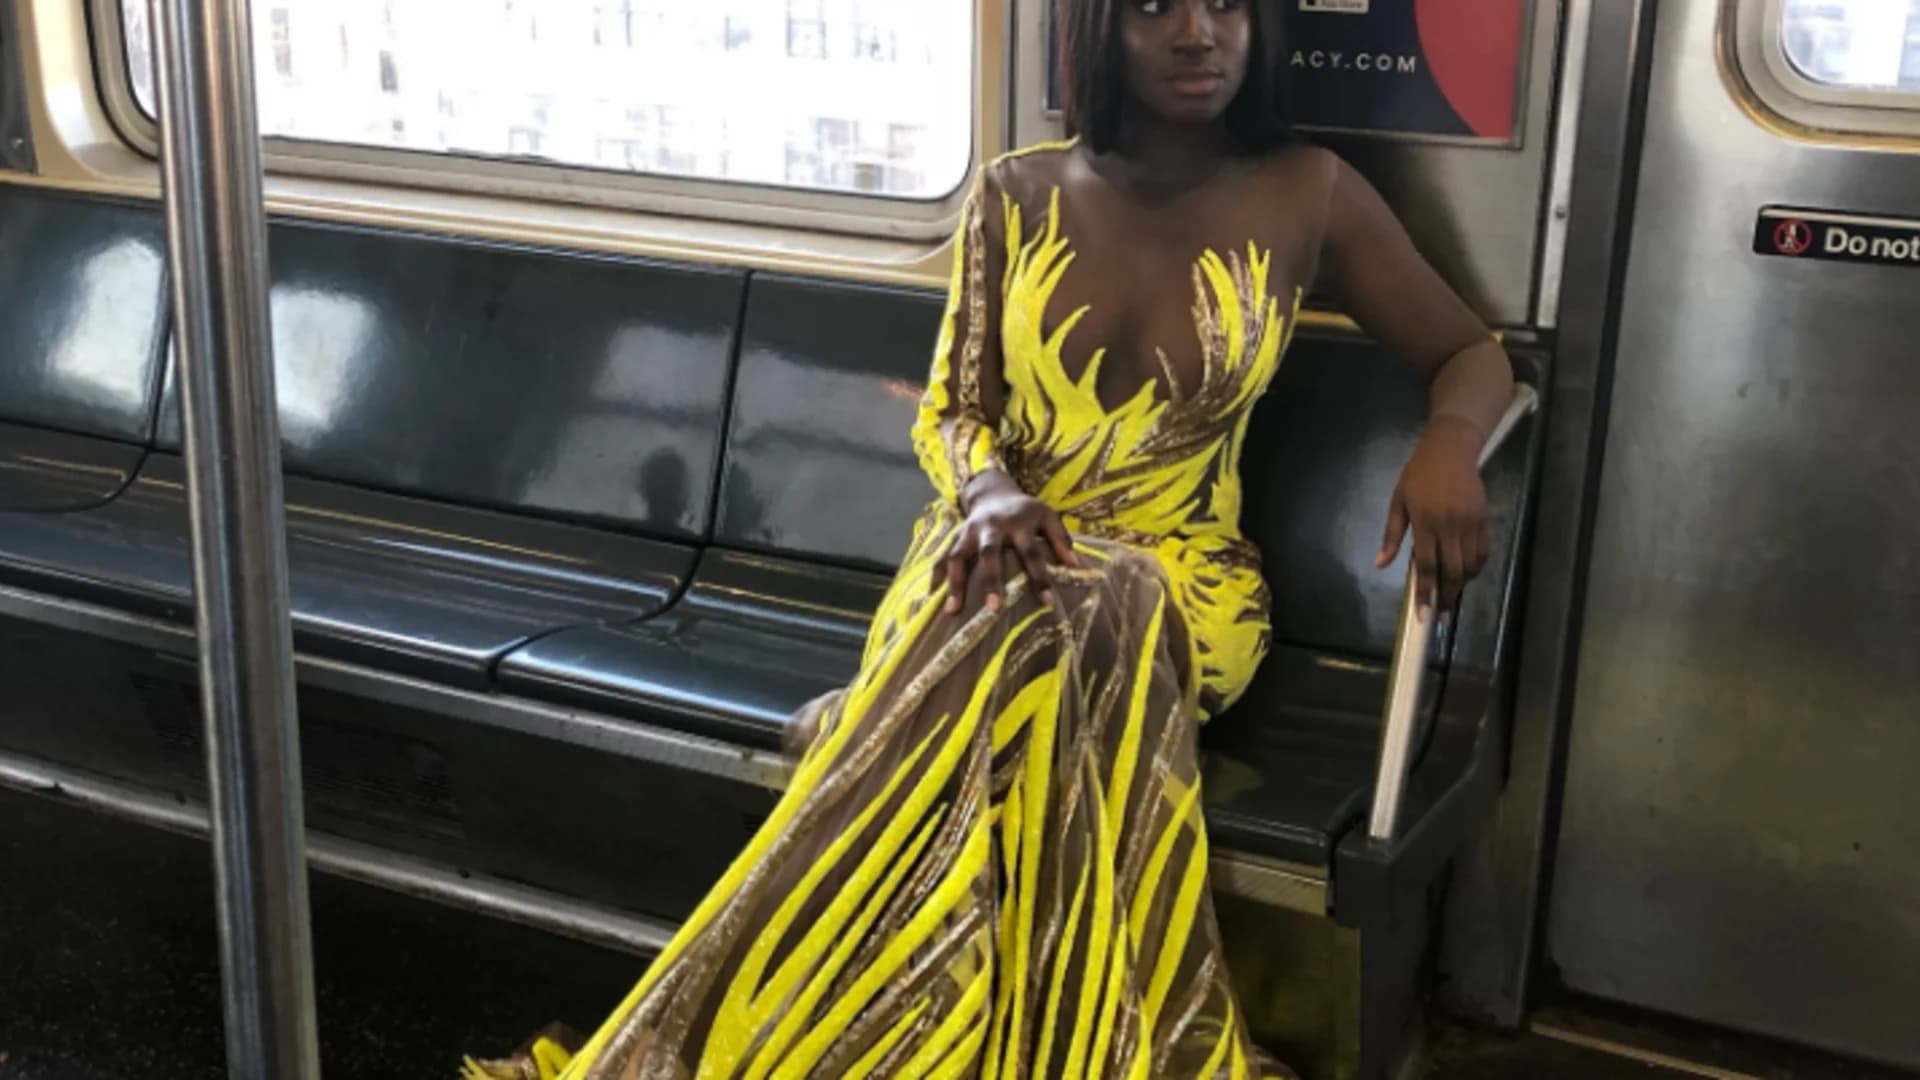 Brooklyn woman's prom dress picture goes viral